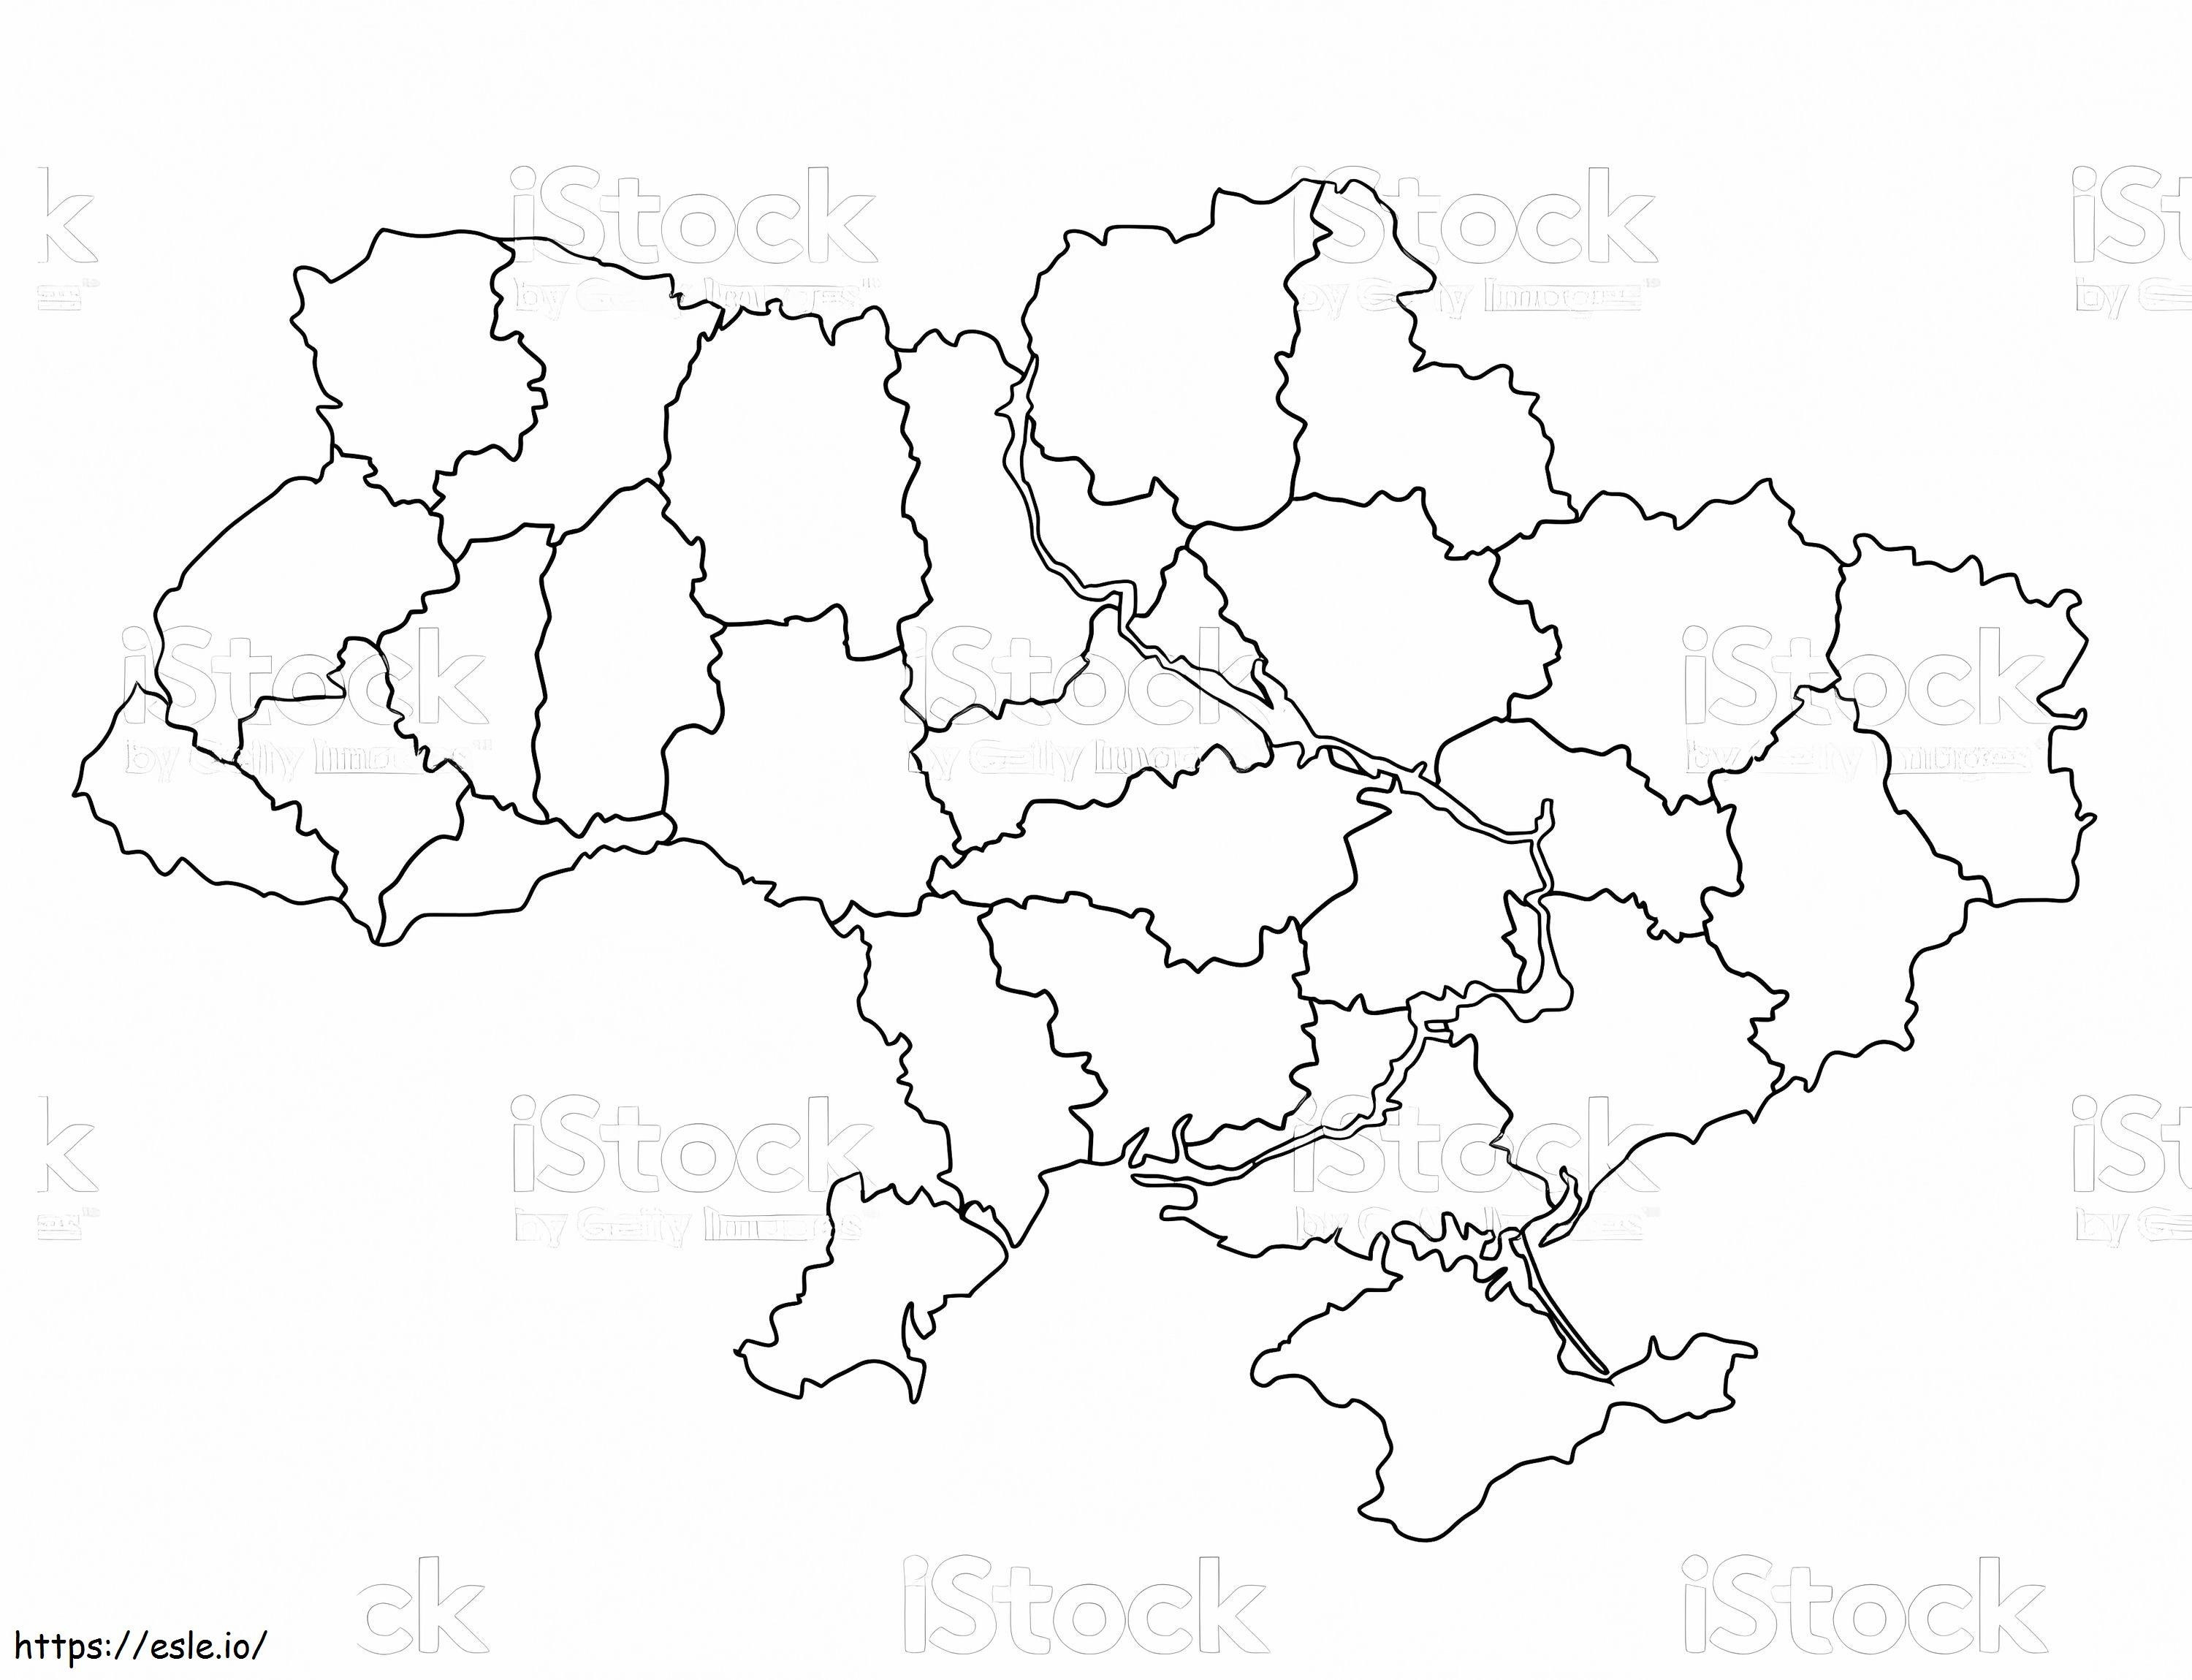 Ukraine Map Coloring Page coloring page